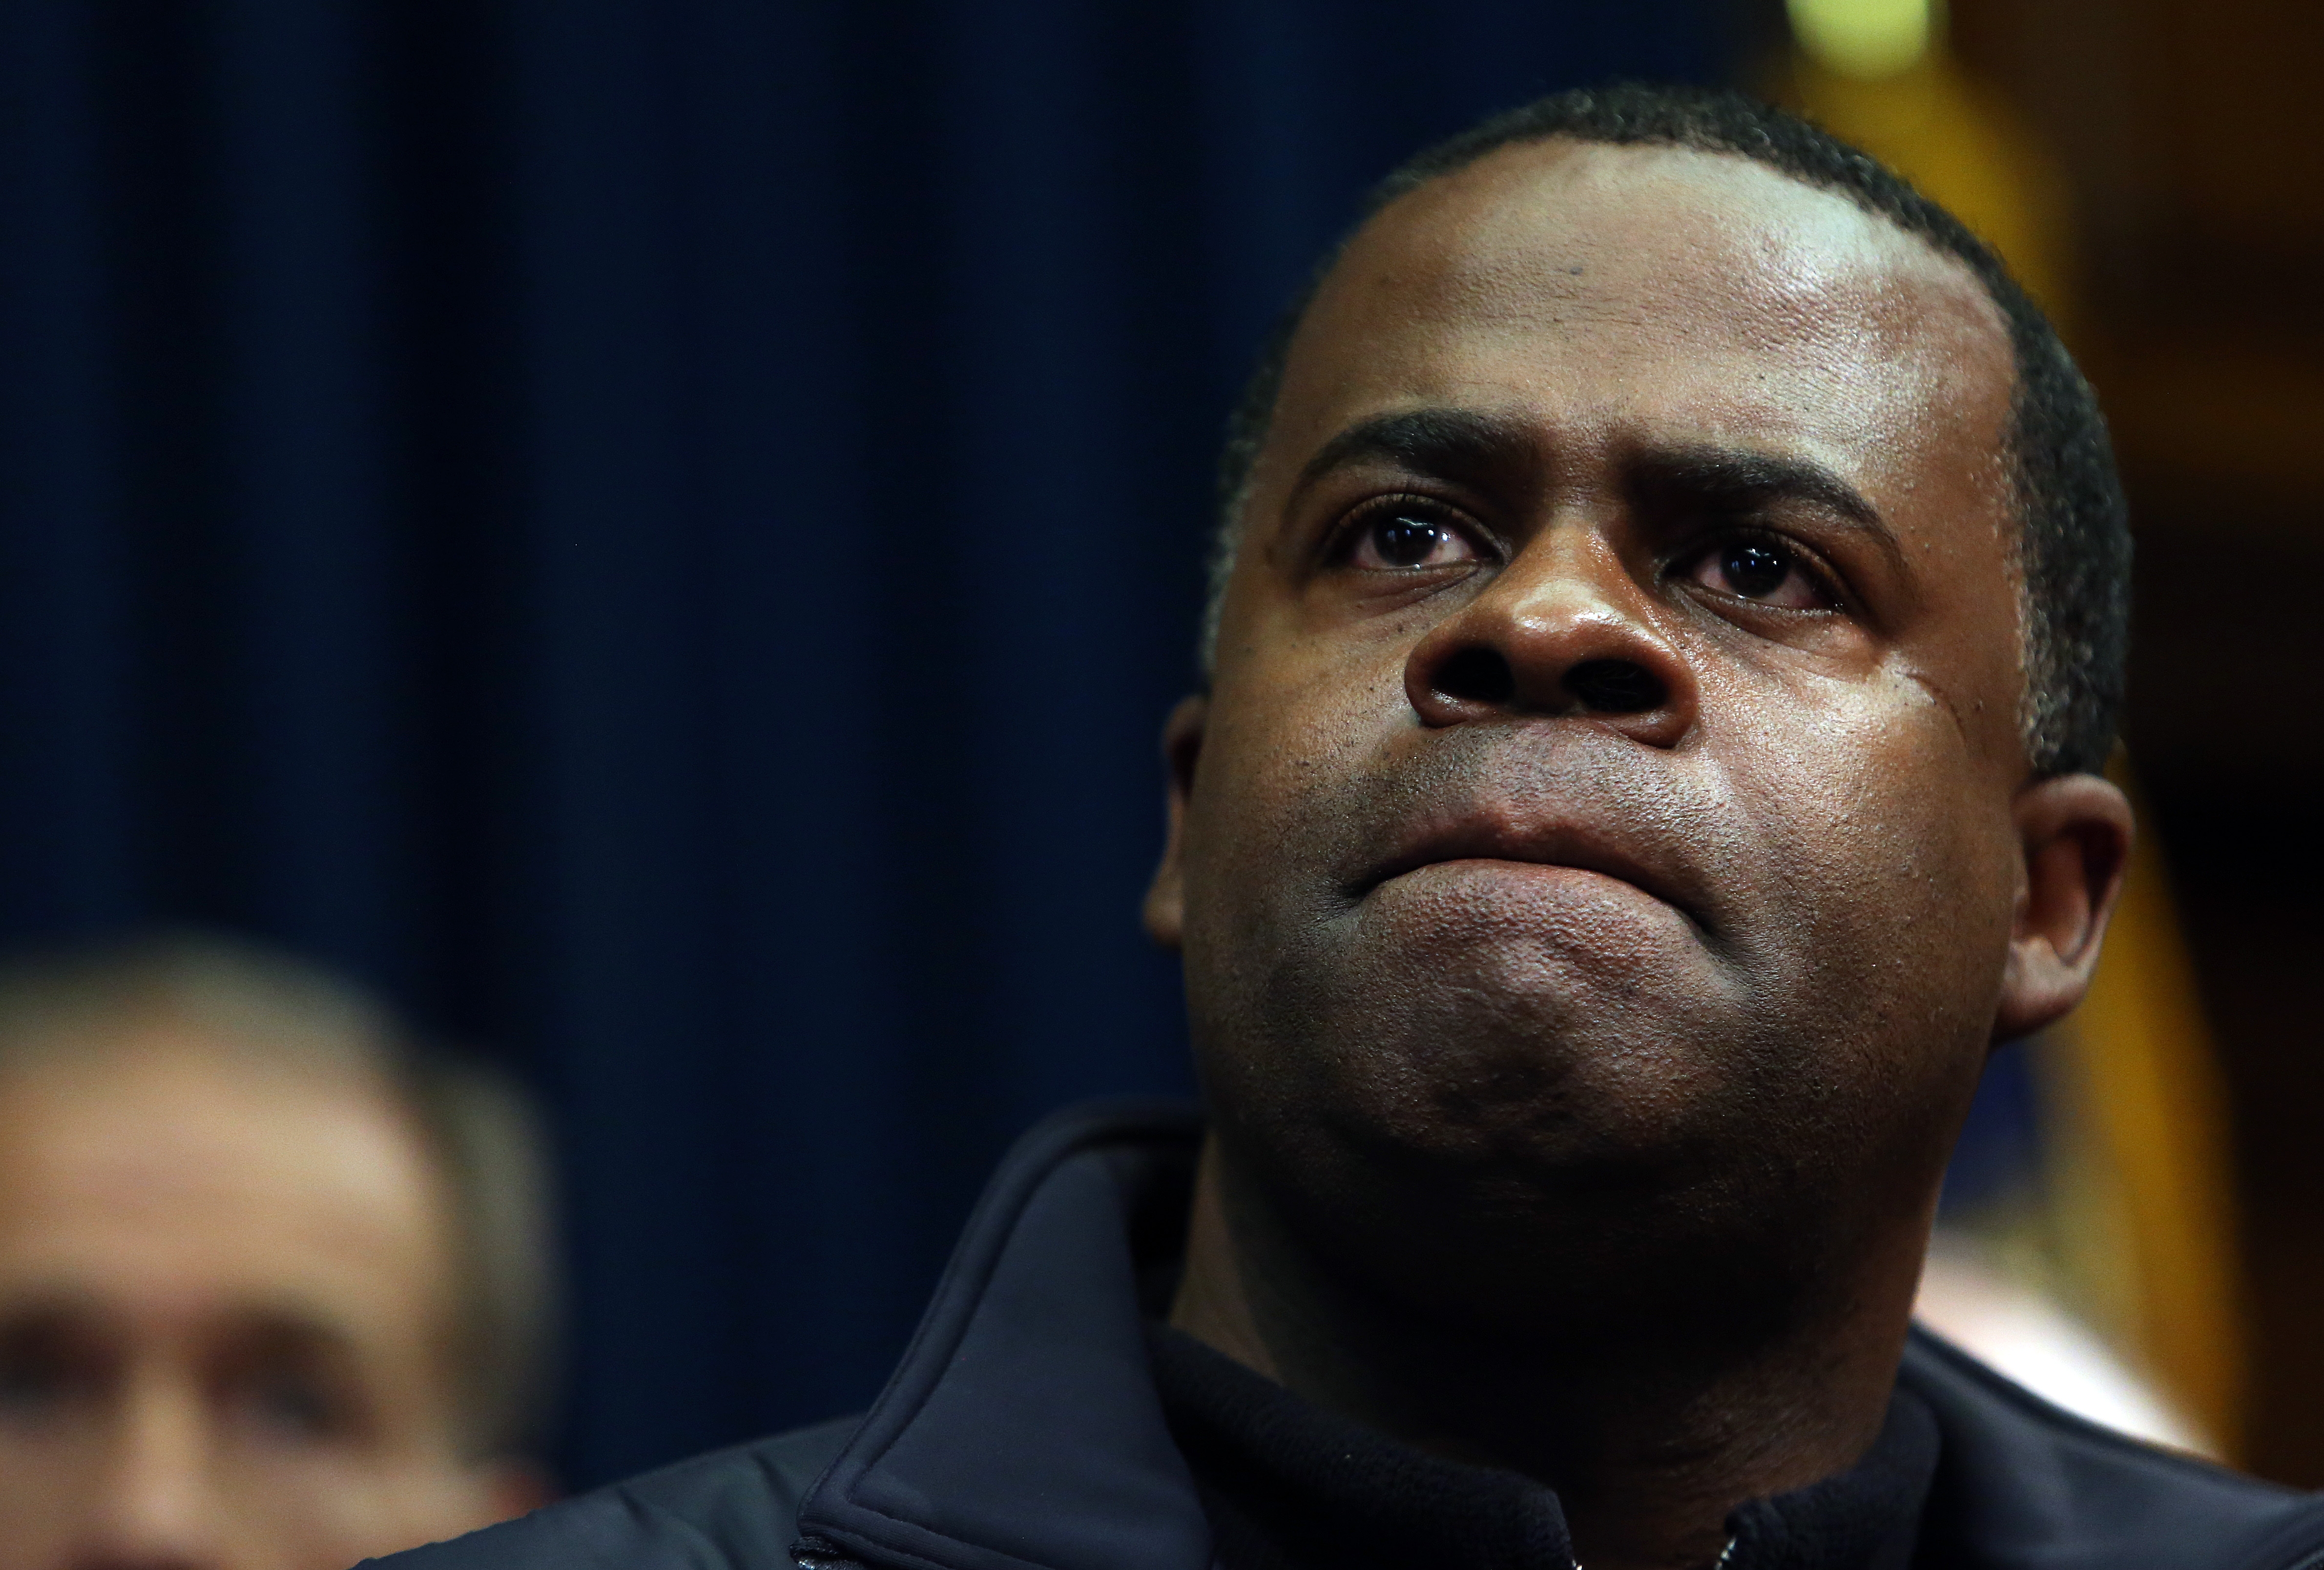 Atlanta Mayor Kasim Reed listens to a question about the city's response to the snow storm during a news conference Wednesday, Jan. 29, 2014 in the Governor's office at the State Capitol in Atlanta. (Ben Gray—Atlanta Journal-Constitution/AP)